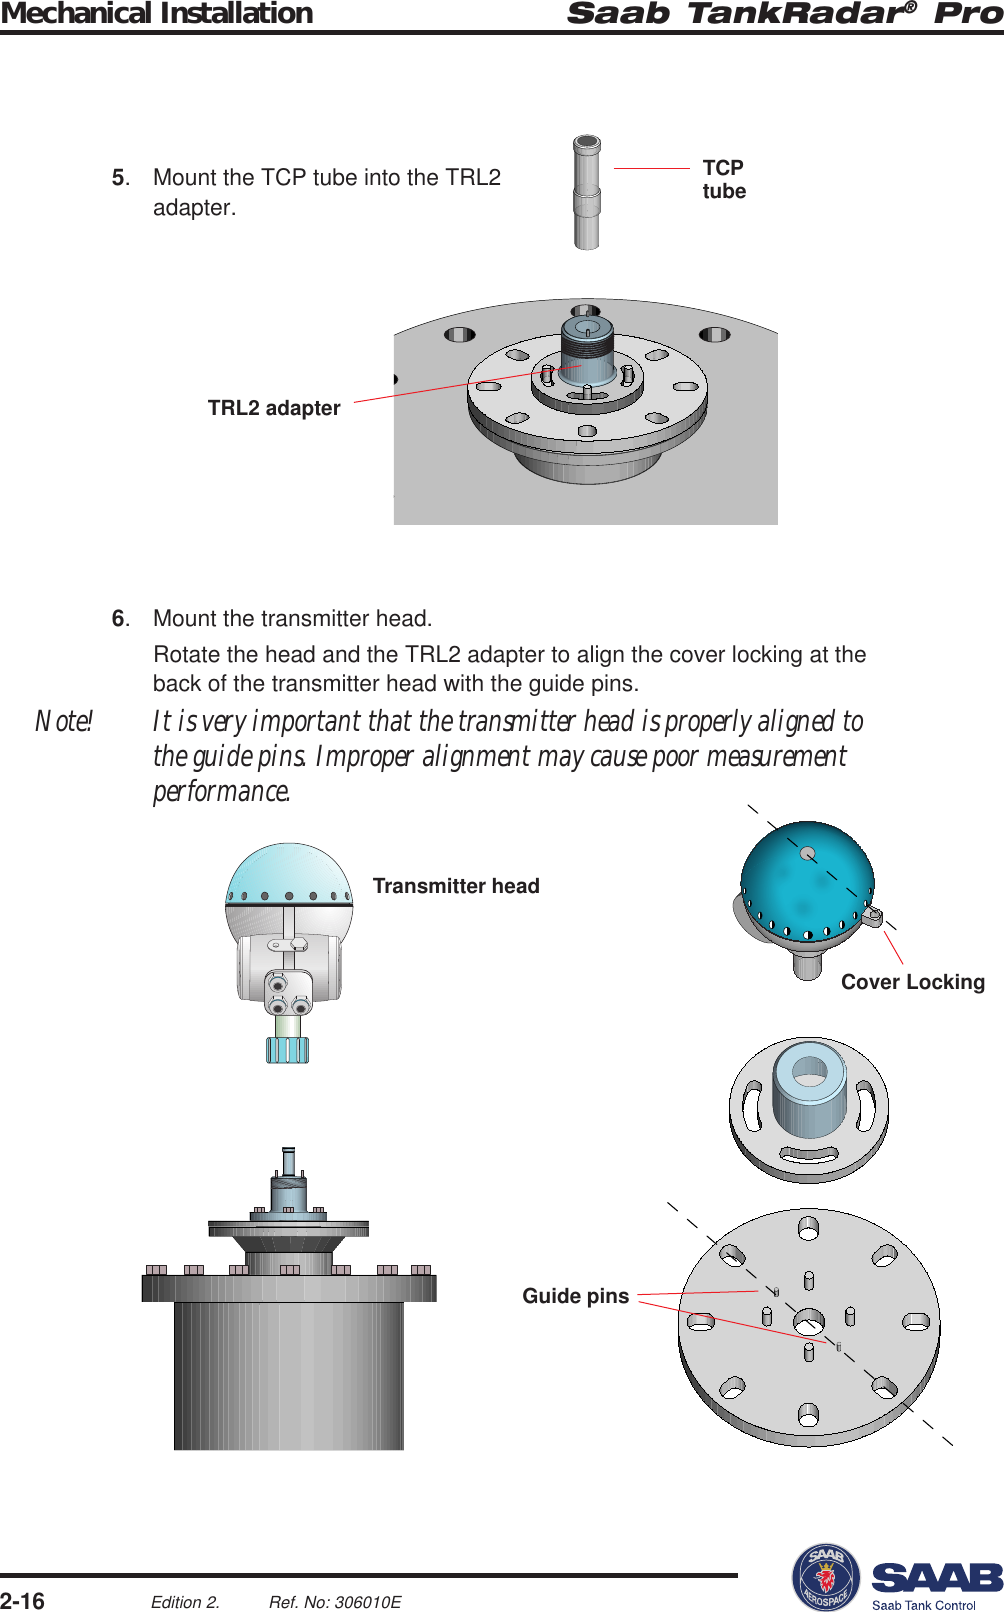 Saab TankRadar® ProMechanical Installation2-16Edition 2. Ref. No: 306010ETCPtubeGuide pinsCover LockingTransmitter headTRL2 adapter5. Mount the TCP tube into the TRL2adapter.6. Mount the transmitter head.Rotate the head and the TRL2 adapter to align the cover locking at theback of the transmitter head with the guide pins.Note! It is very important that the transmitter head is properly aligned tothe guide pins. Improper alignment may cause poor measurementperformance.